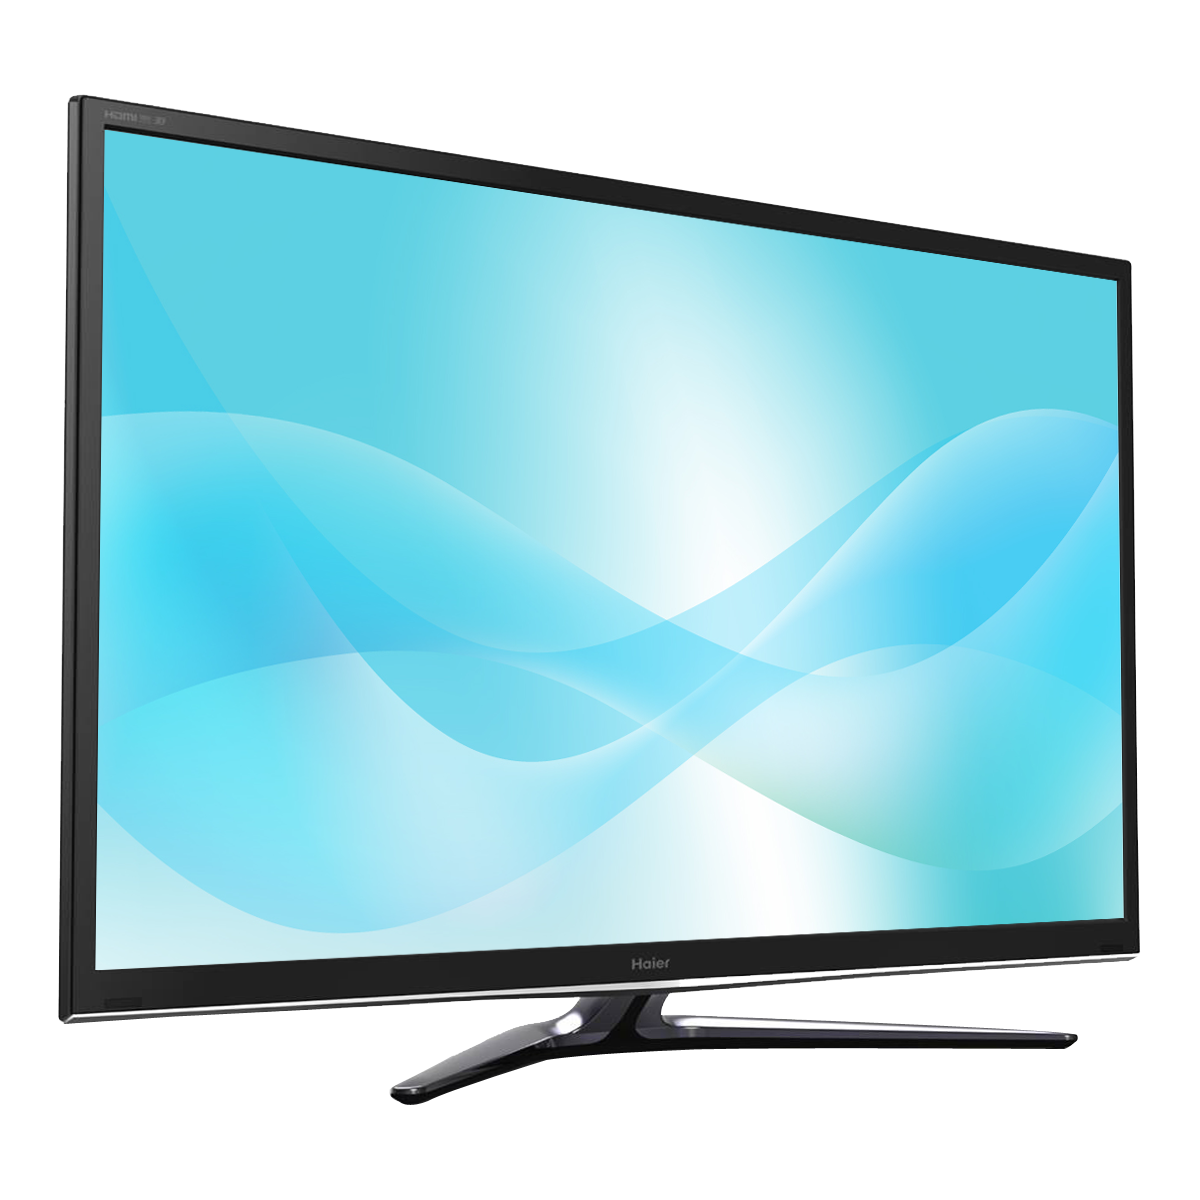 Haier Tv PNG Image